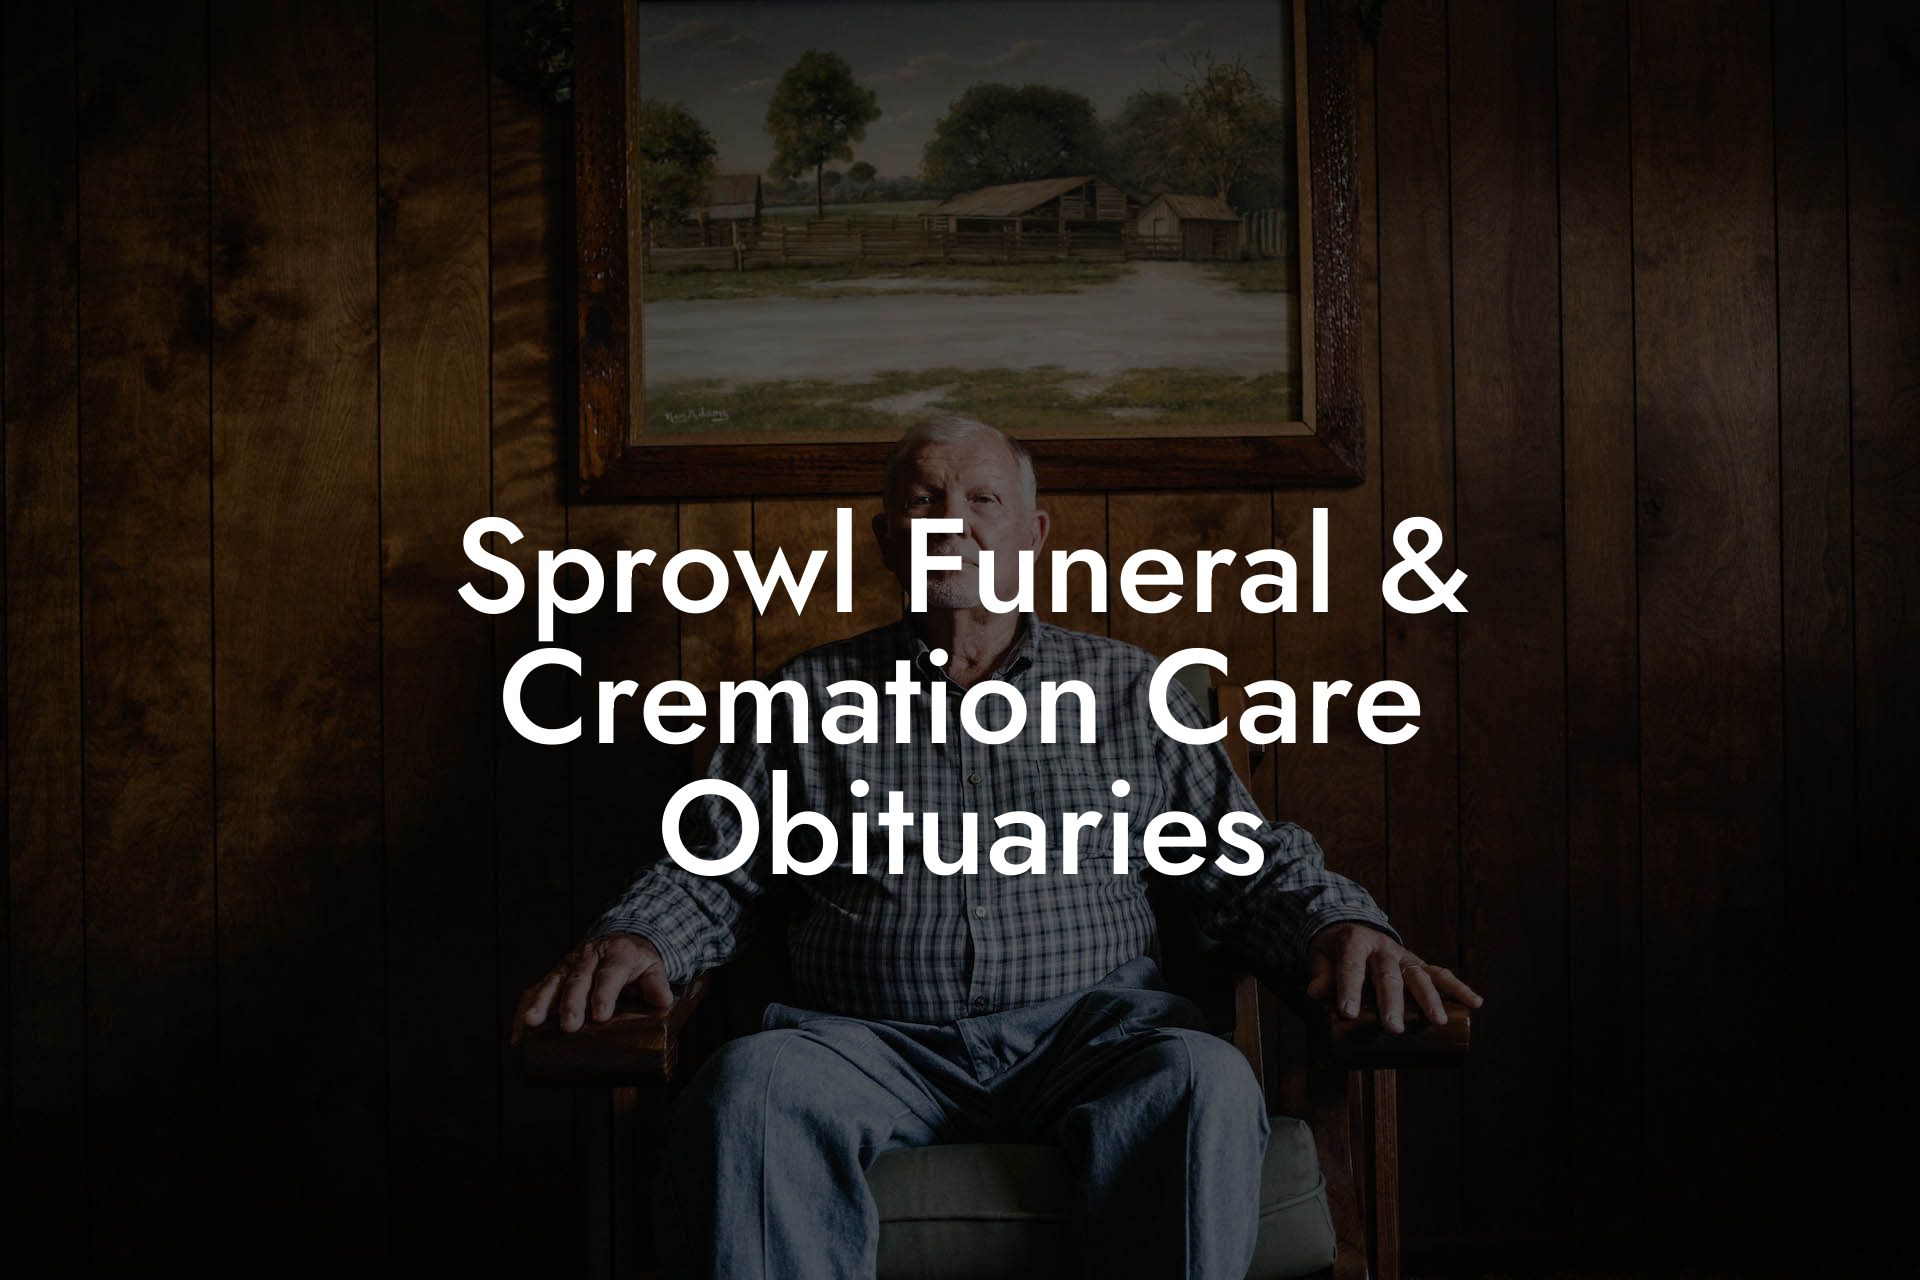 Sprowl Funeral & Cremation Care Obituaries